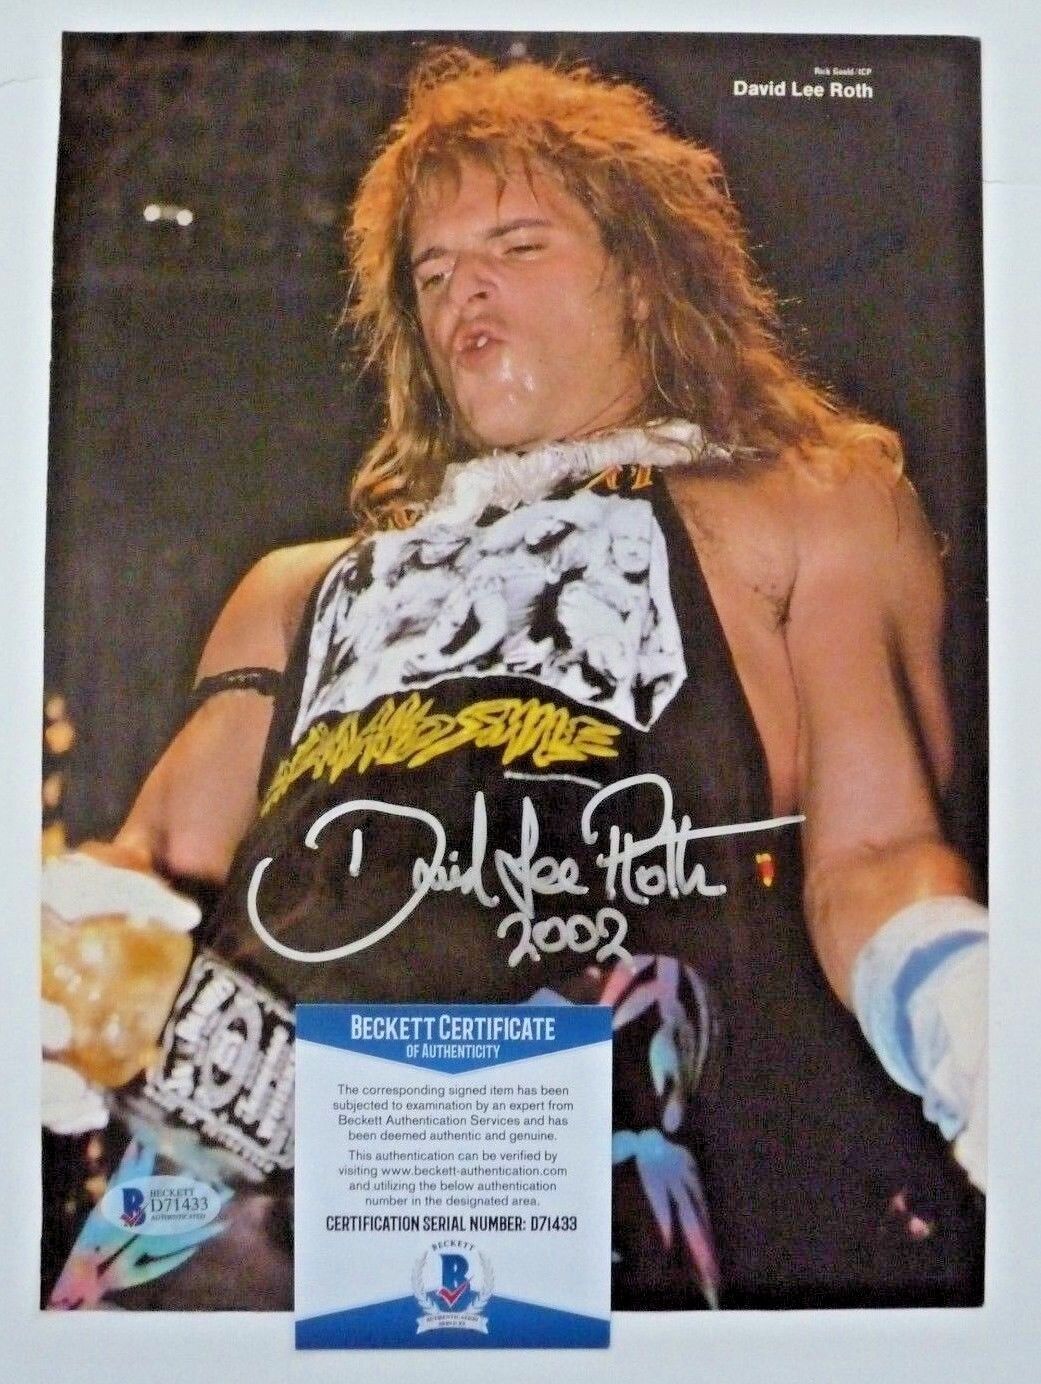 David Lee Roth VINTAGE Signed Autographed 8x11 Magazine Page Photo Poster painting BAS Certified